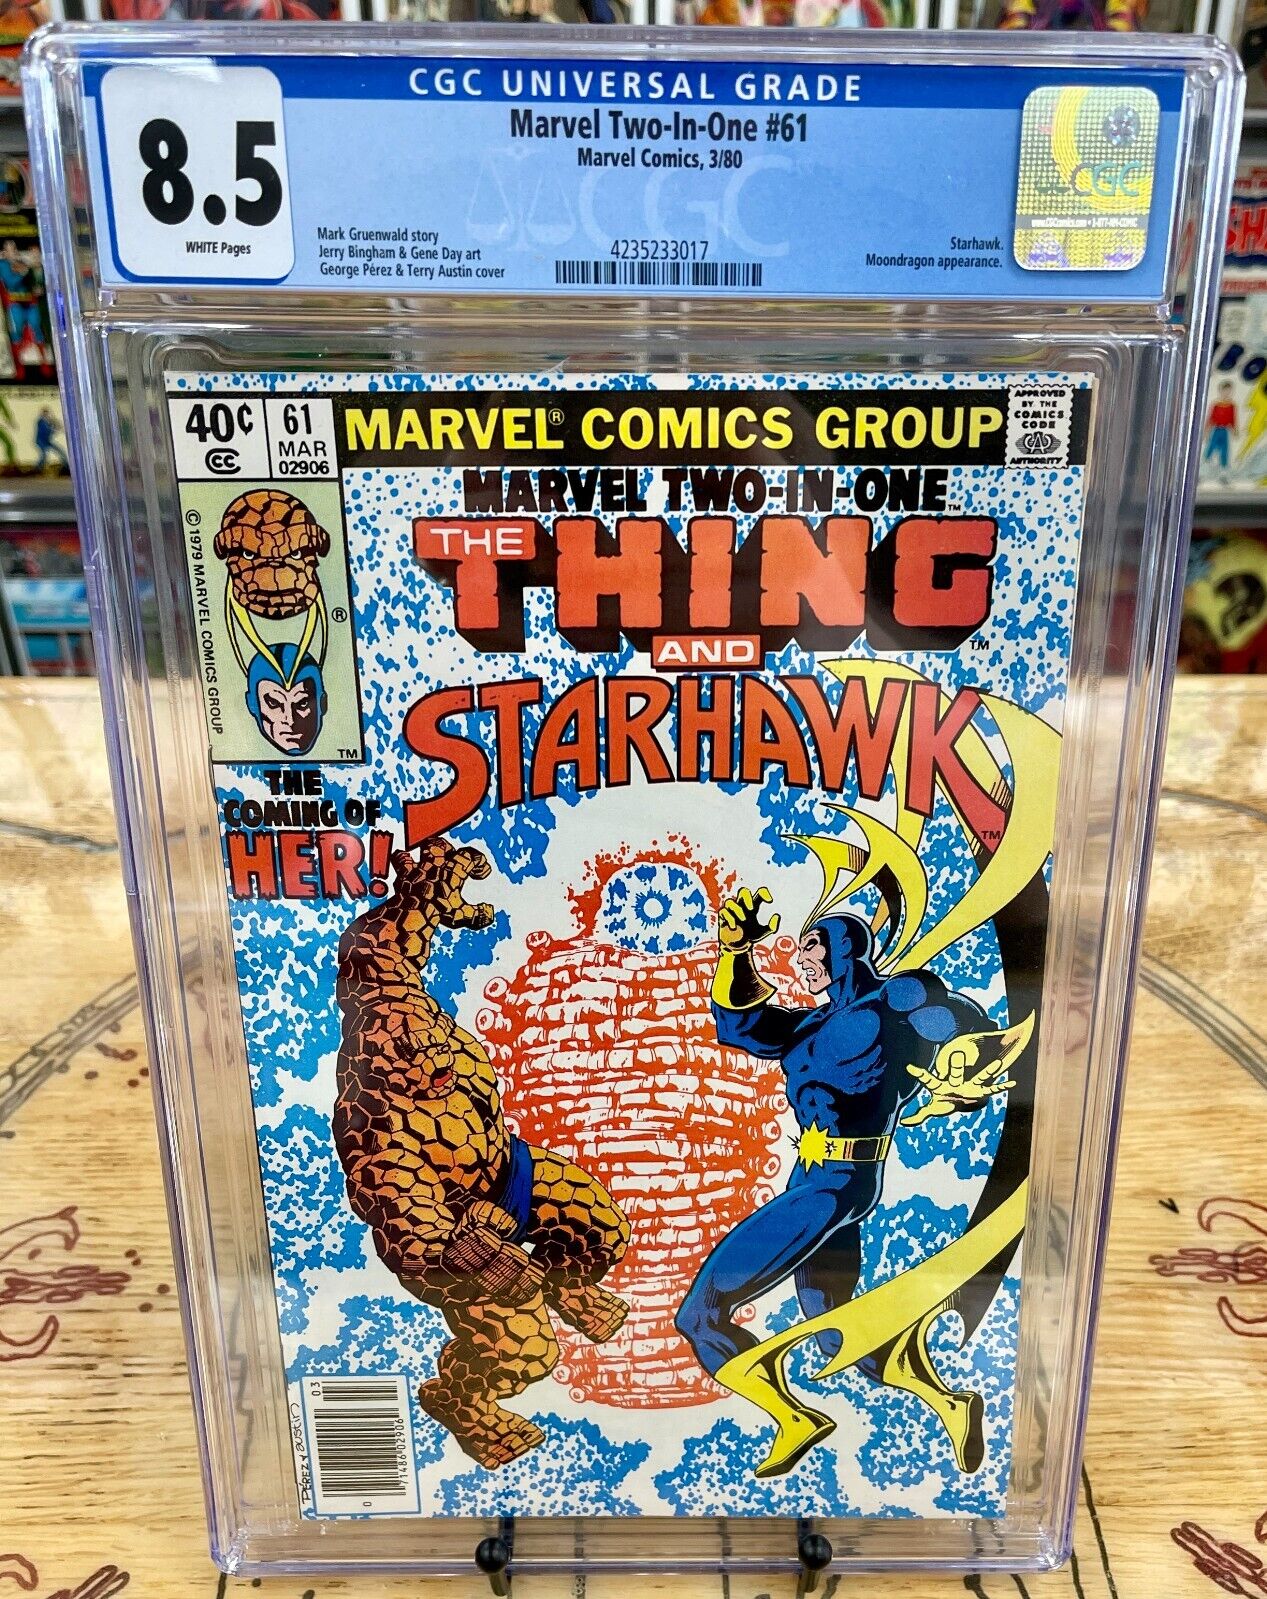 MARVEL TWO-IN-ONE #61 CGC 8.5 1st Appearance of Her - Key Issue